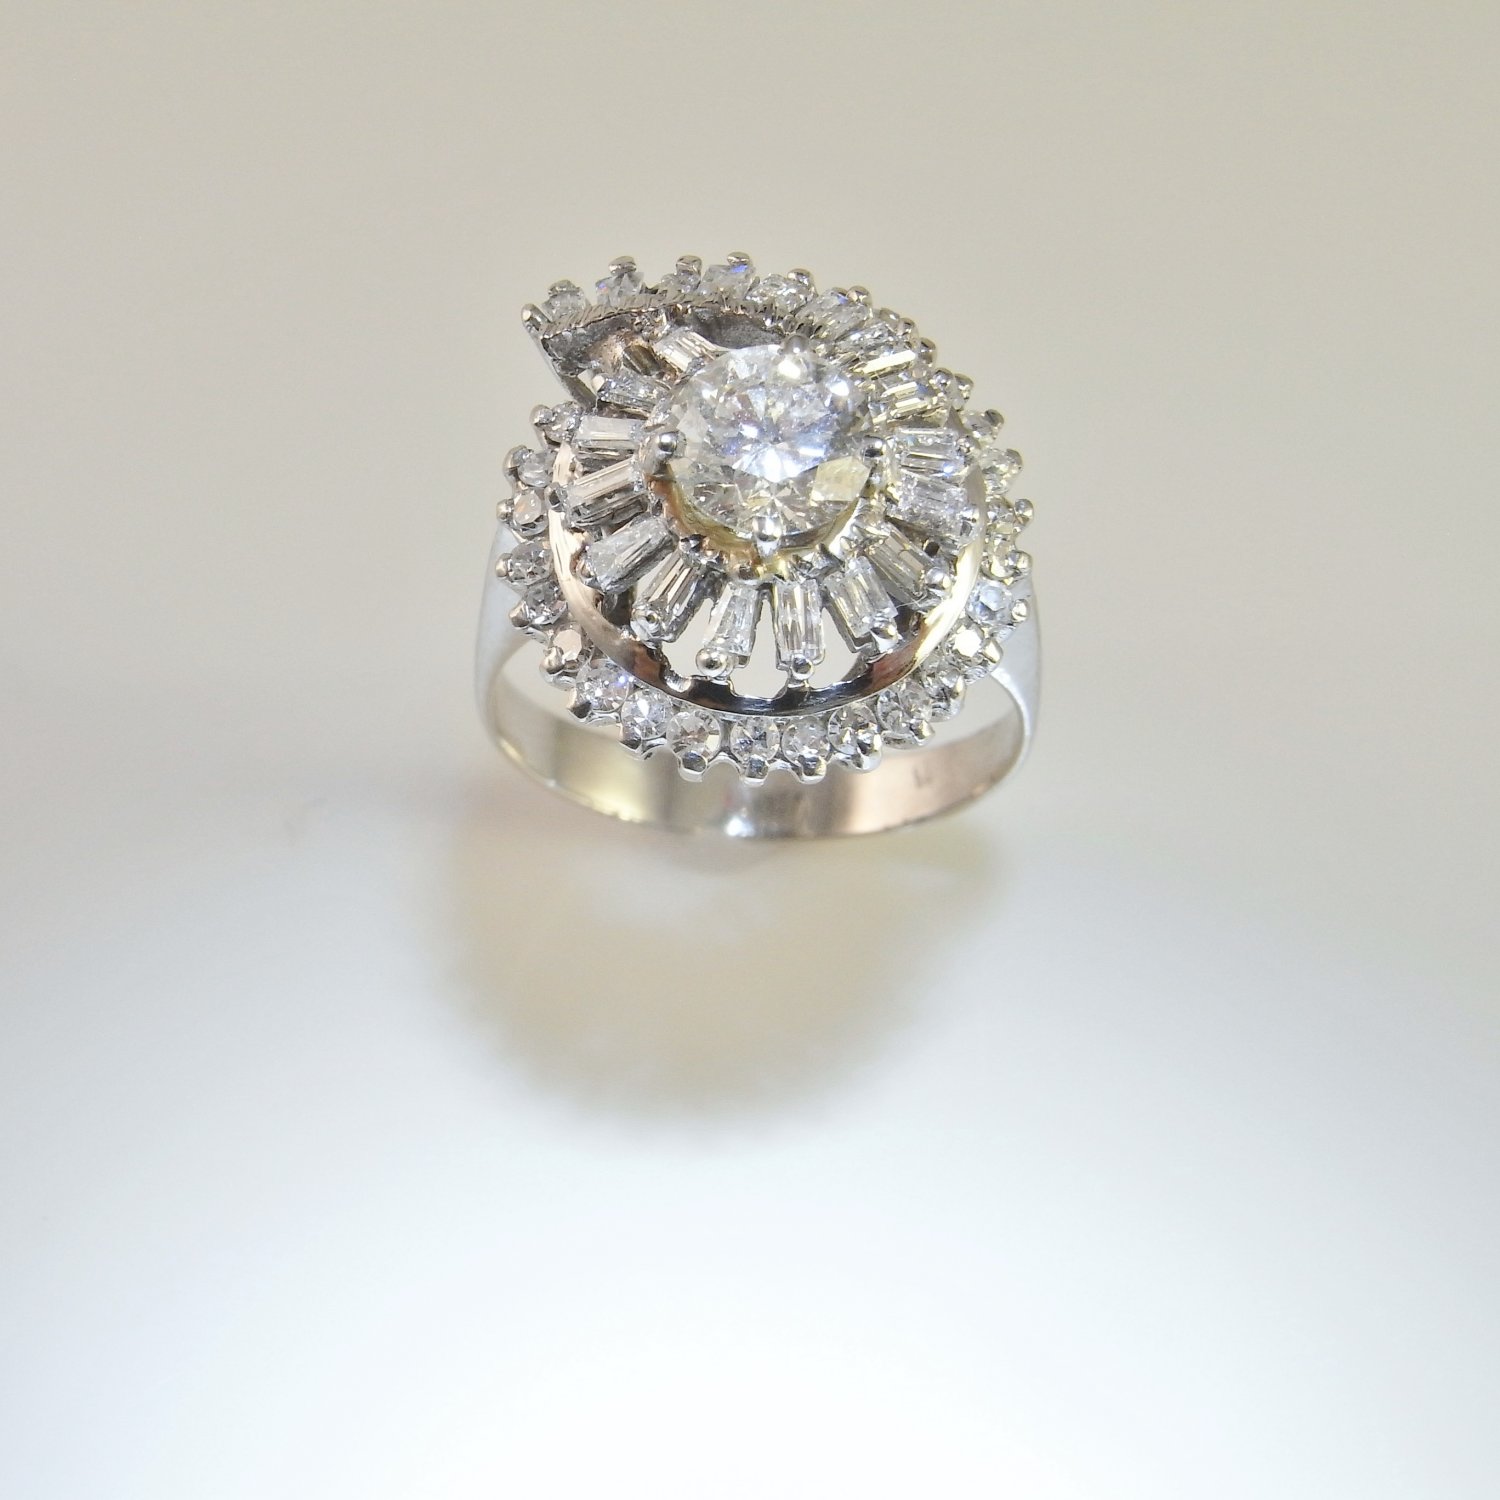 1940s Art Deco Diamond Ring 18K Gold Fine Diamond Engagement Ring Wedding Ring Band Swirl Cluster Solitaire 1920s 1930s Transition Cut Luxury Diamond Ring Cocktail Ring Large Diamond Ring Anniversary Promise Dress Heirloom Jewelry High End Custom